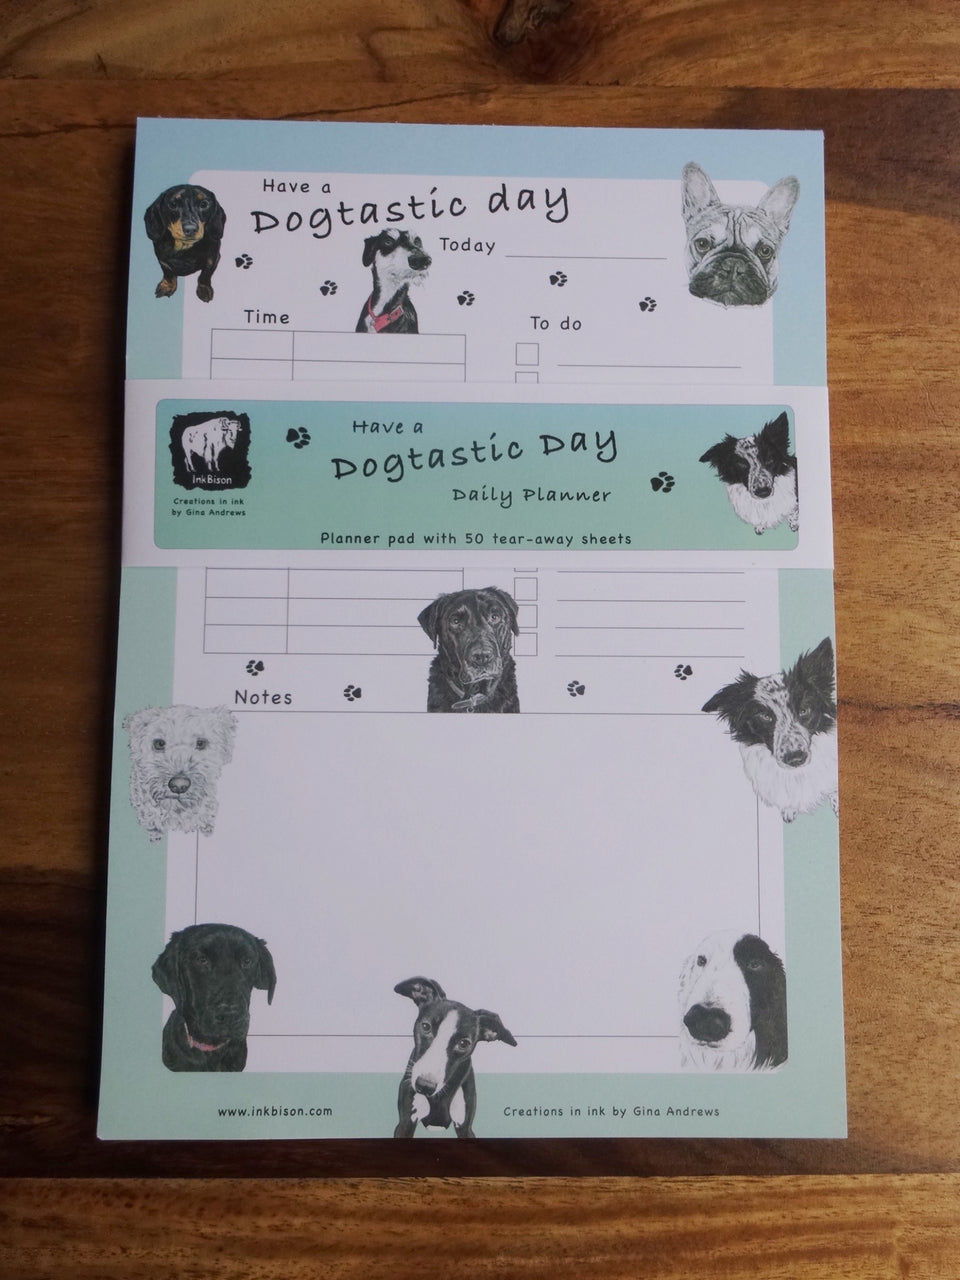 'Have a Dogtastic Day' - Daily Planner